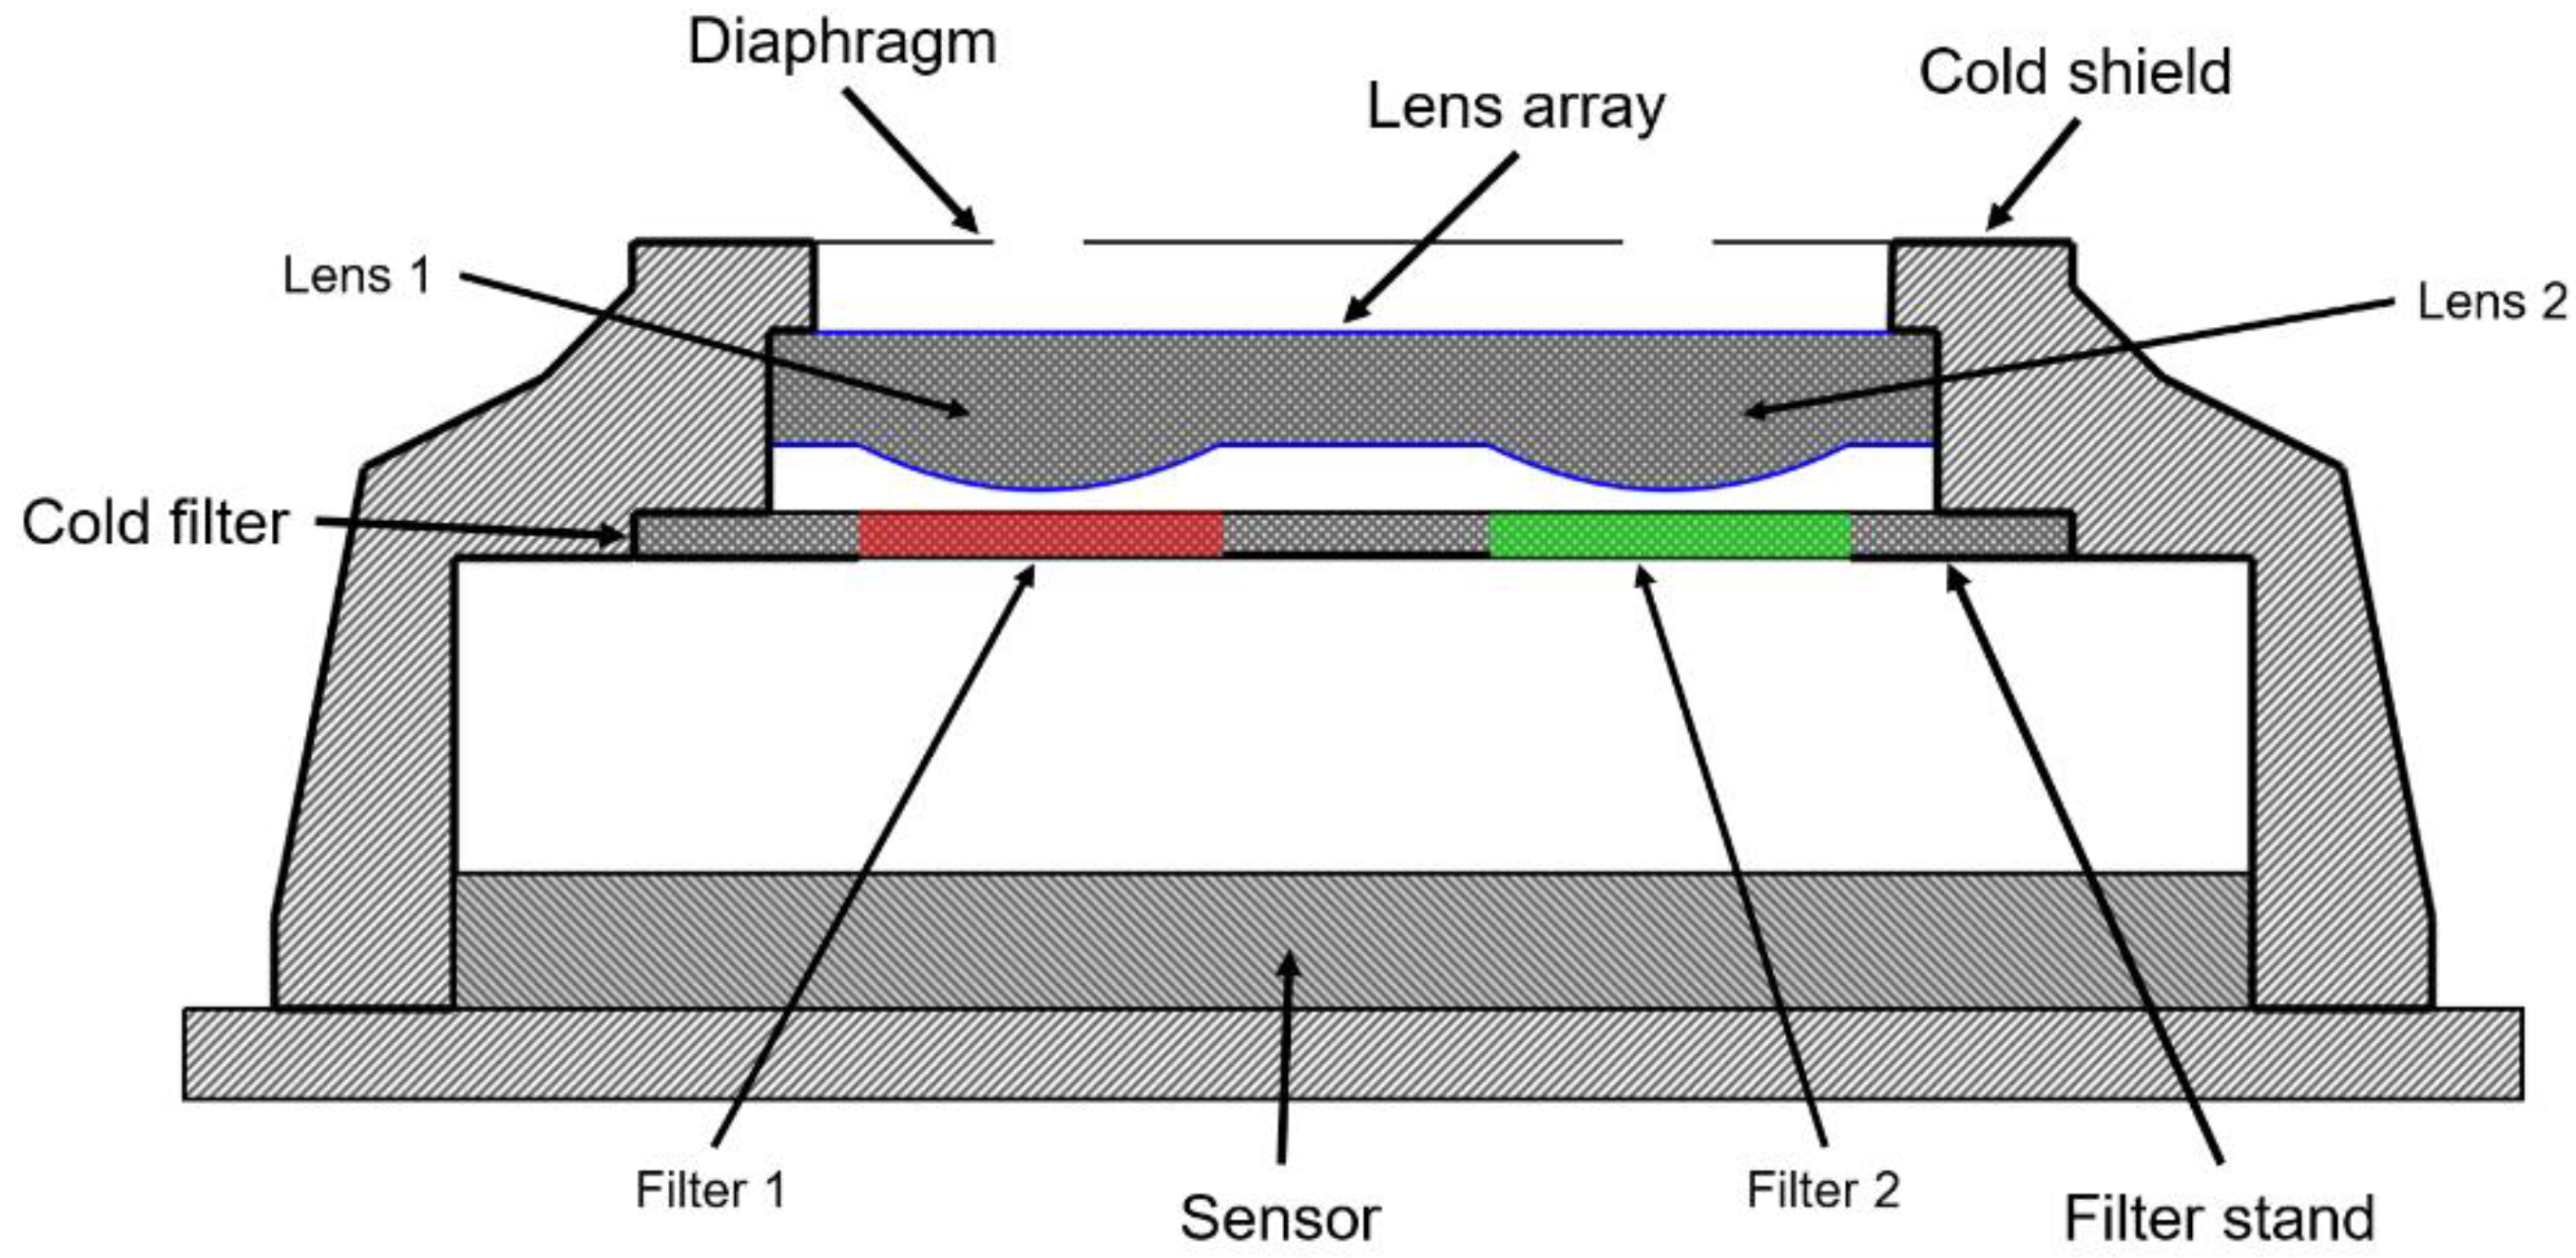 Illustration of a) a compact refractive Fresnel lens showing CAs, b) a